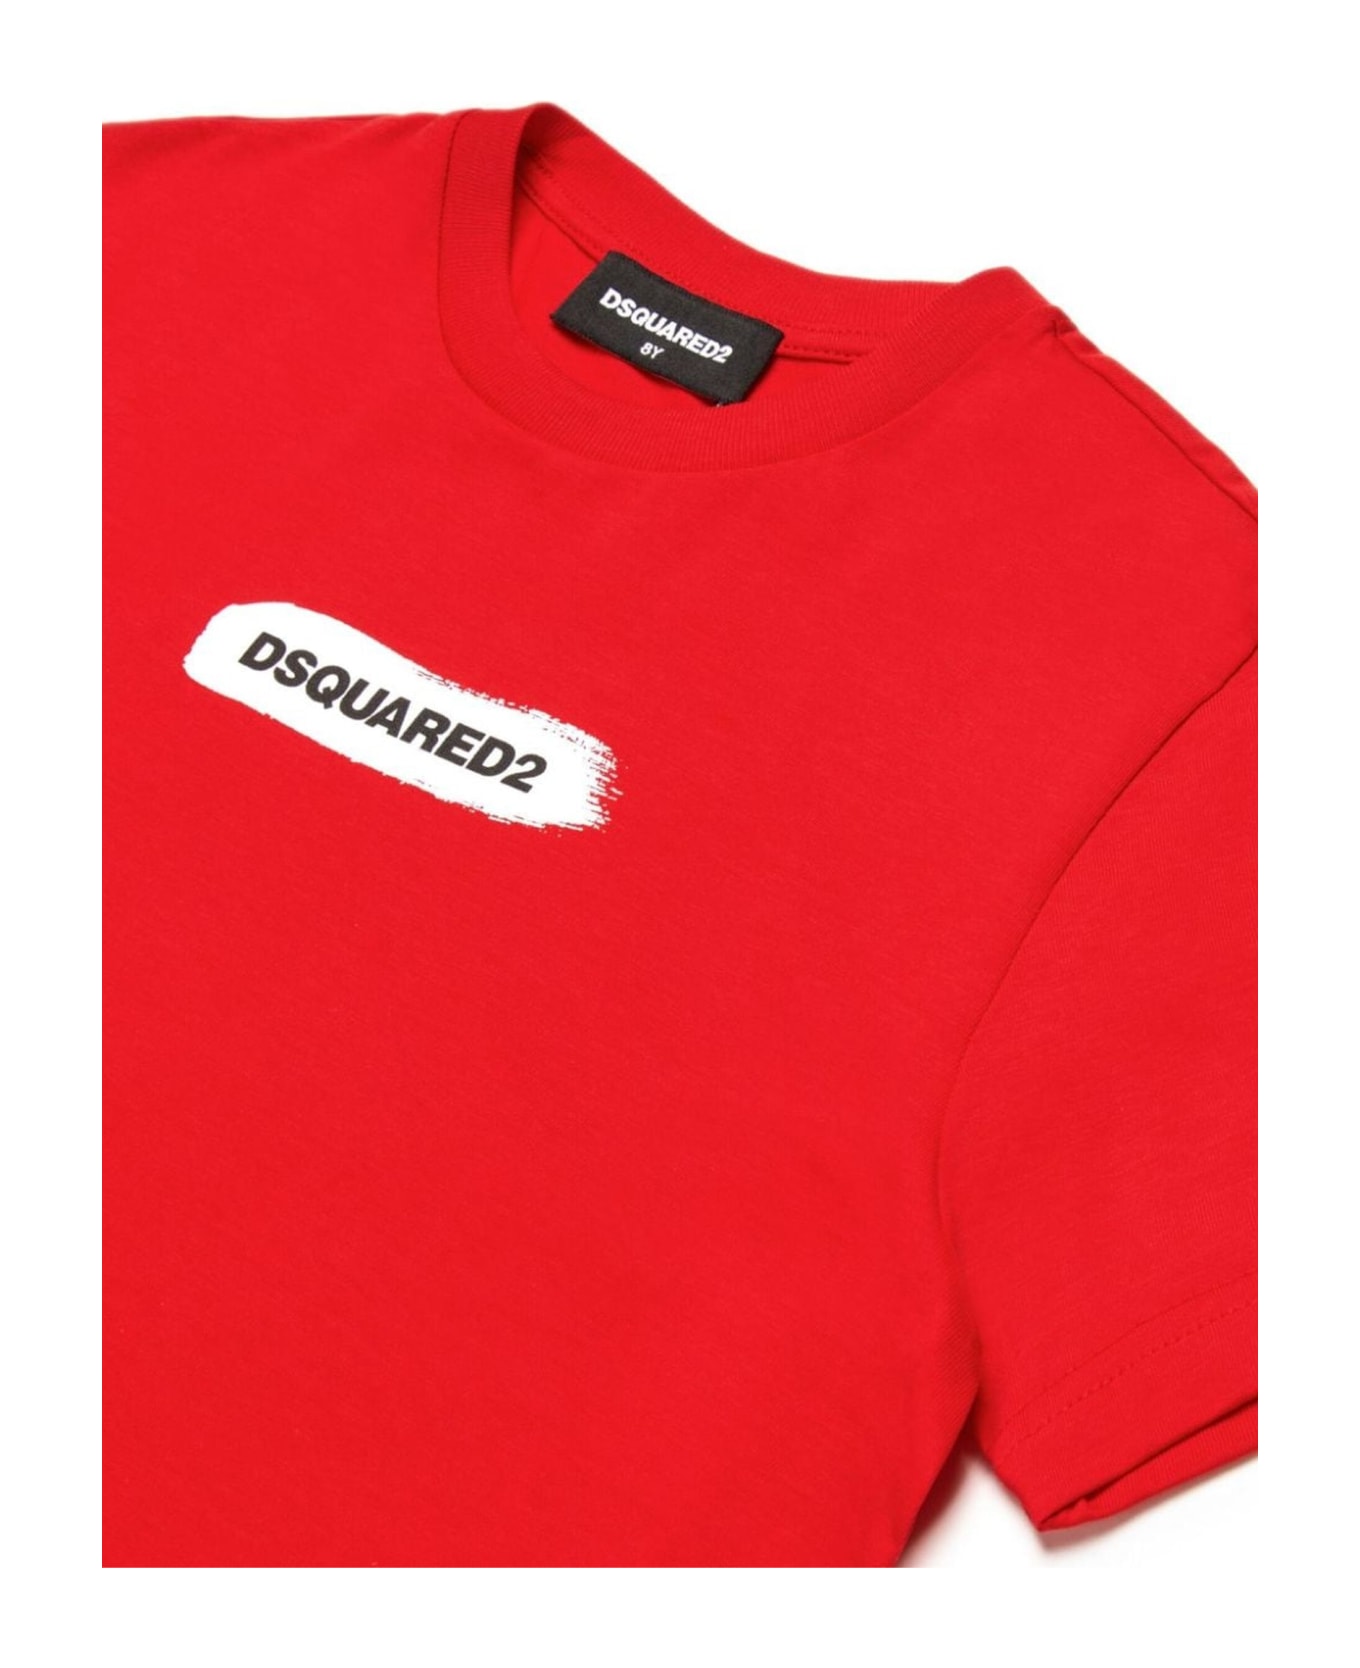 Dsquared2 Red Cotton T-shirt - Rosso Tシャツ＆ポロシャツ